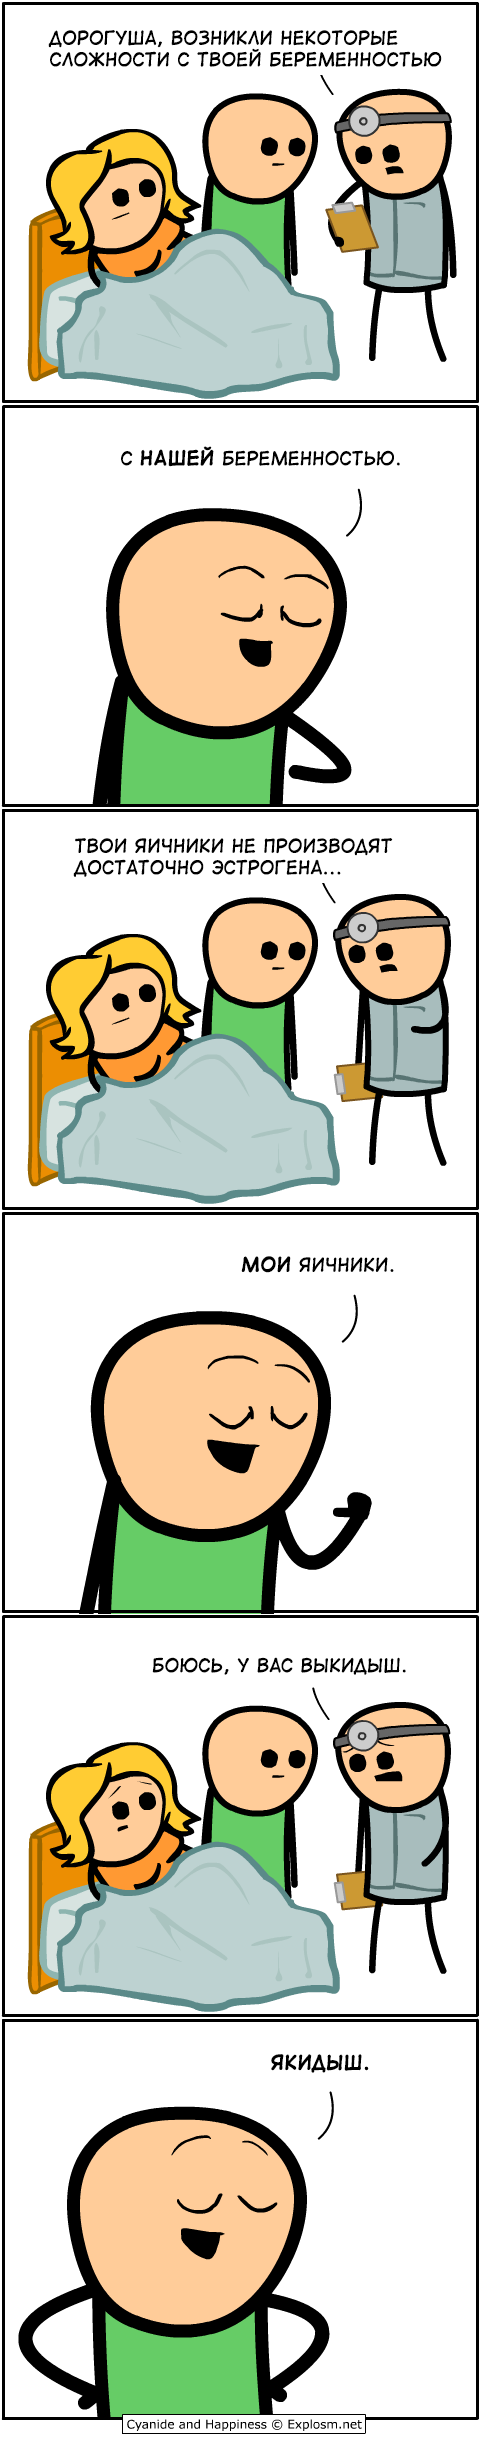   , Cyanide and Happiness, 